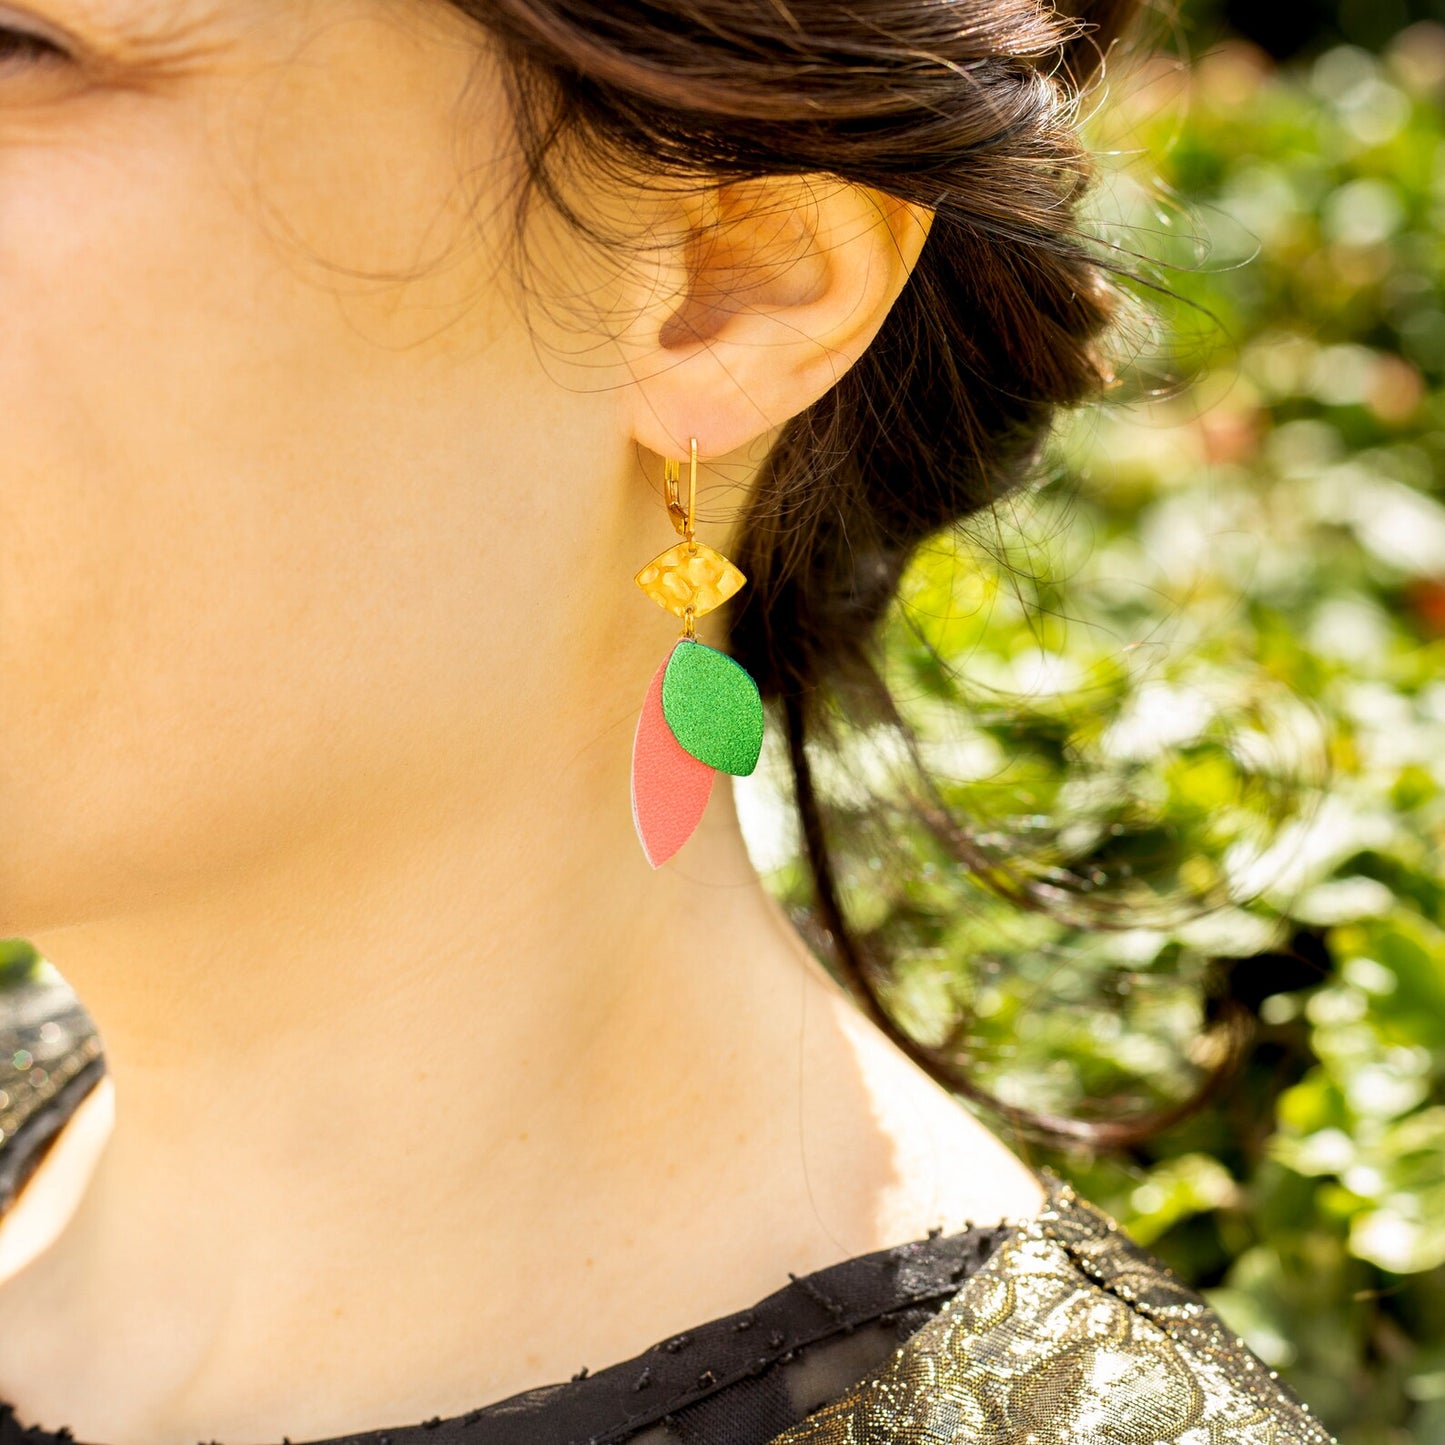 Lozaa earrings - gold and black leather petals